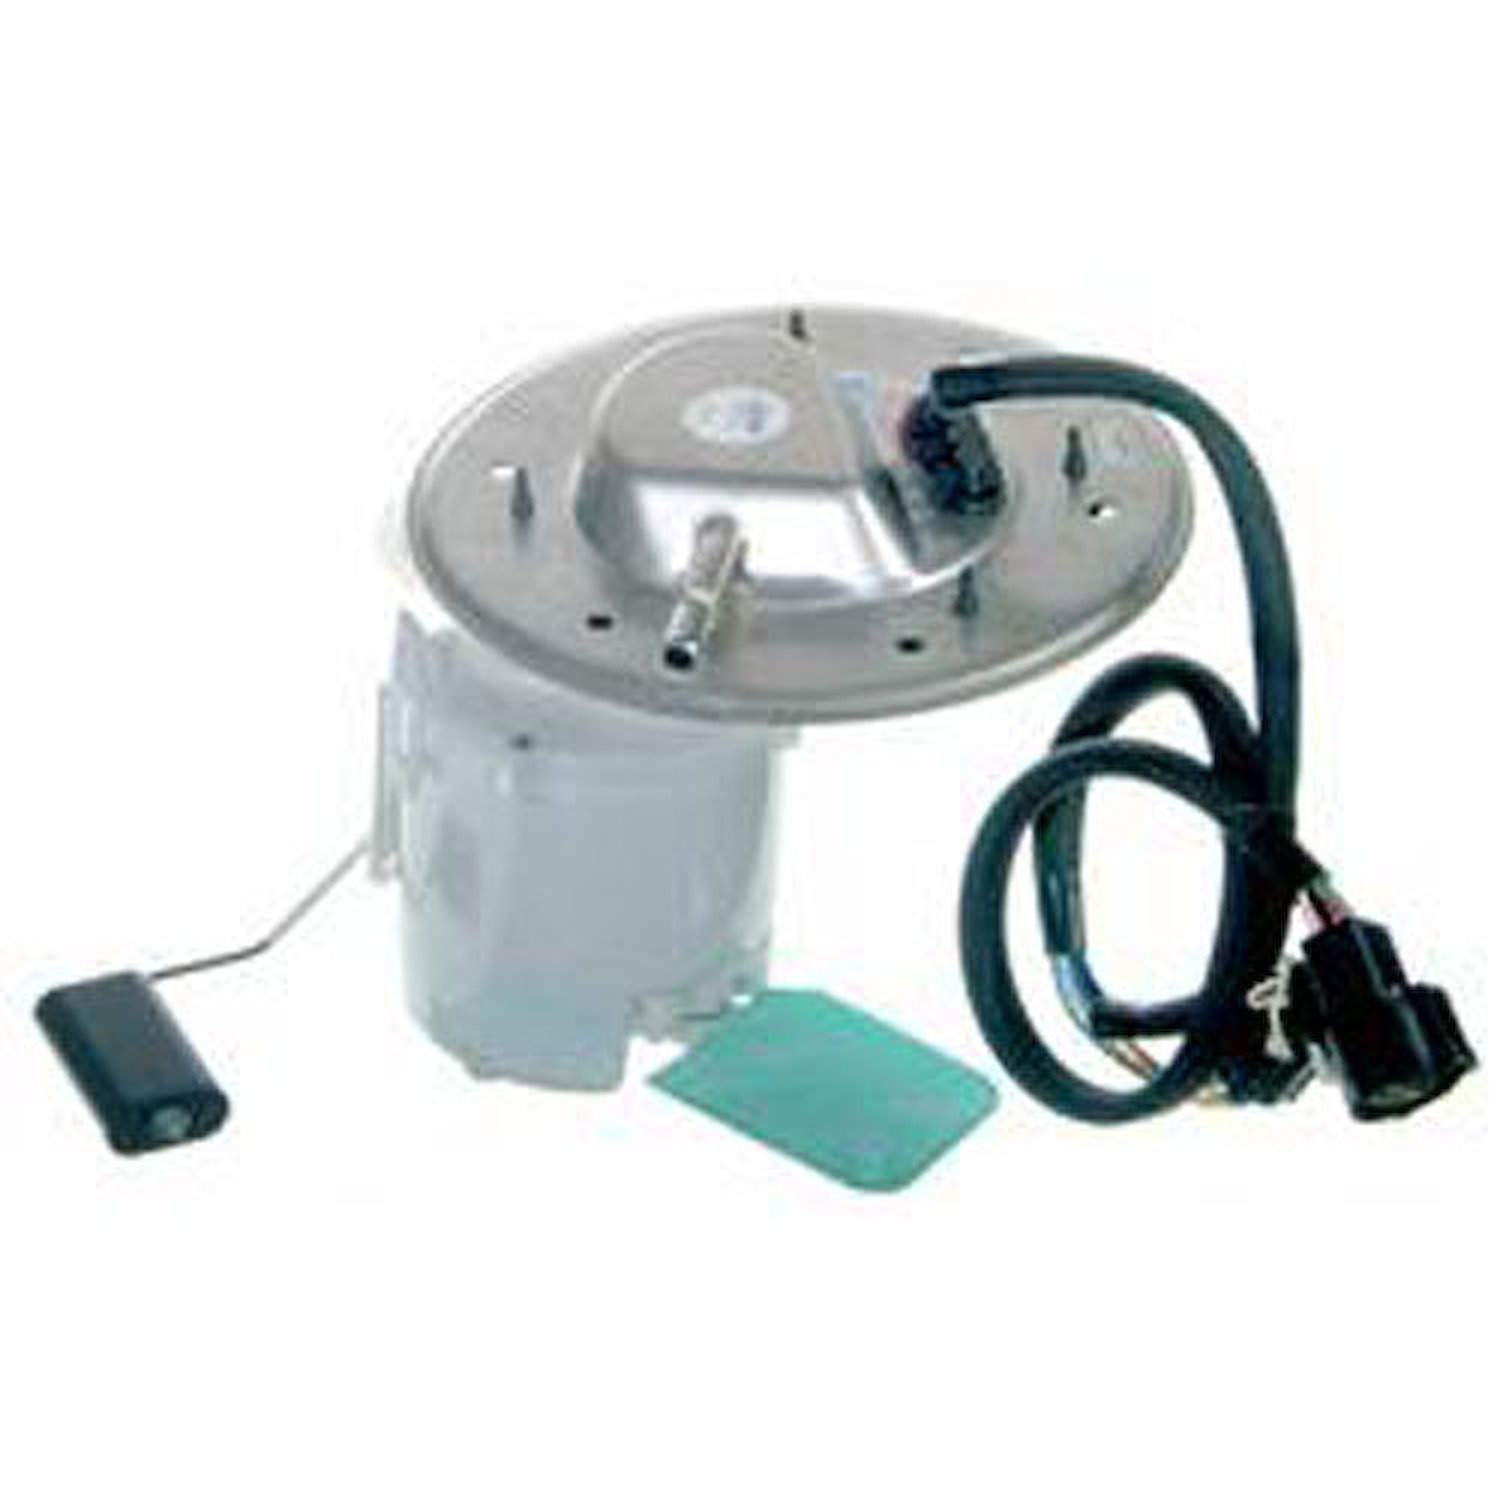 OE Ford Replacement Electric Fuel Pump Module Assembly 1999-00 Ford Mustang 3.8L V6/4.6L V8